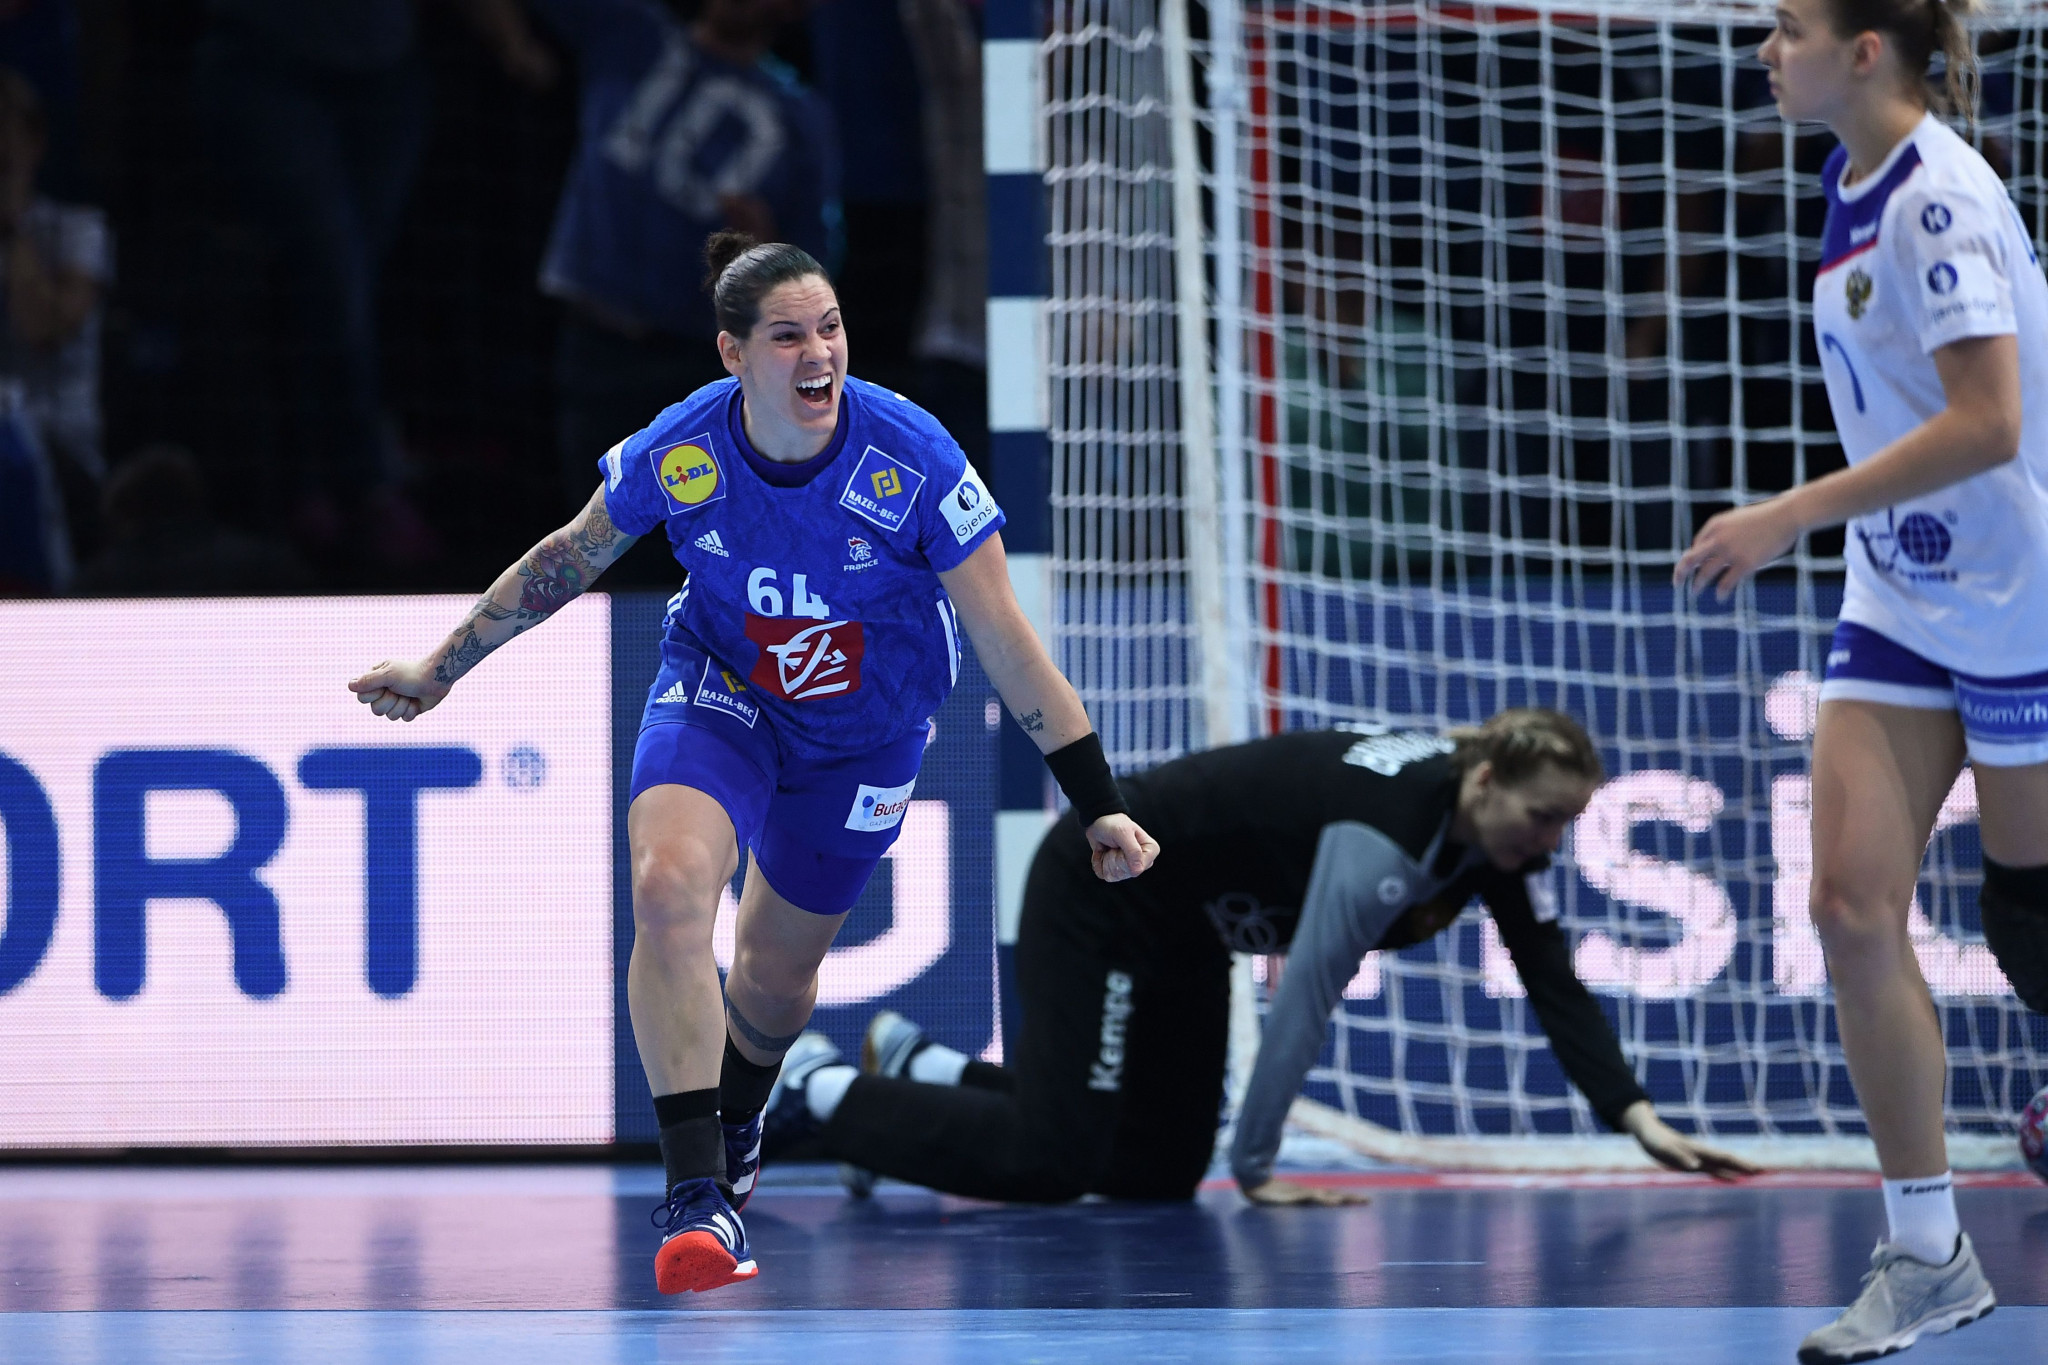 France are the reigning European women's handball champions having beaten Russia in last year's final on home soil ©Getty Images